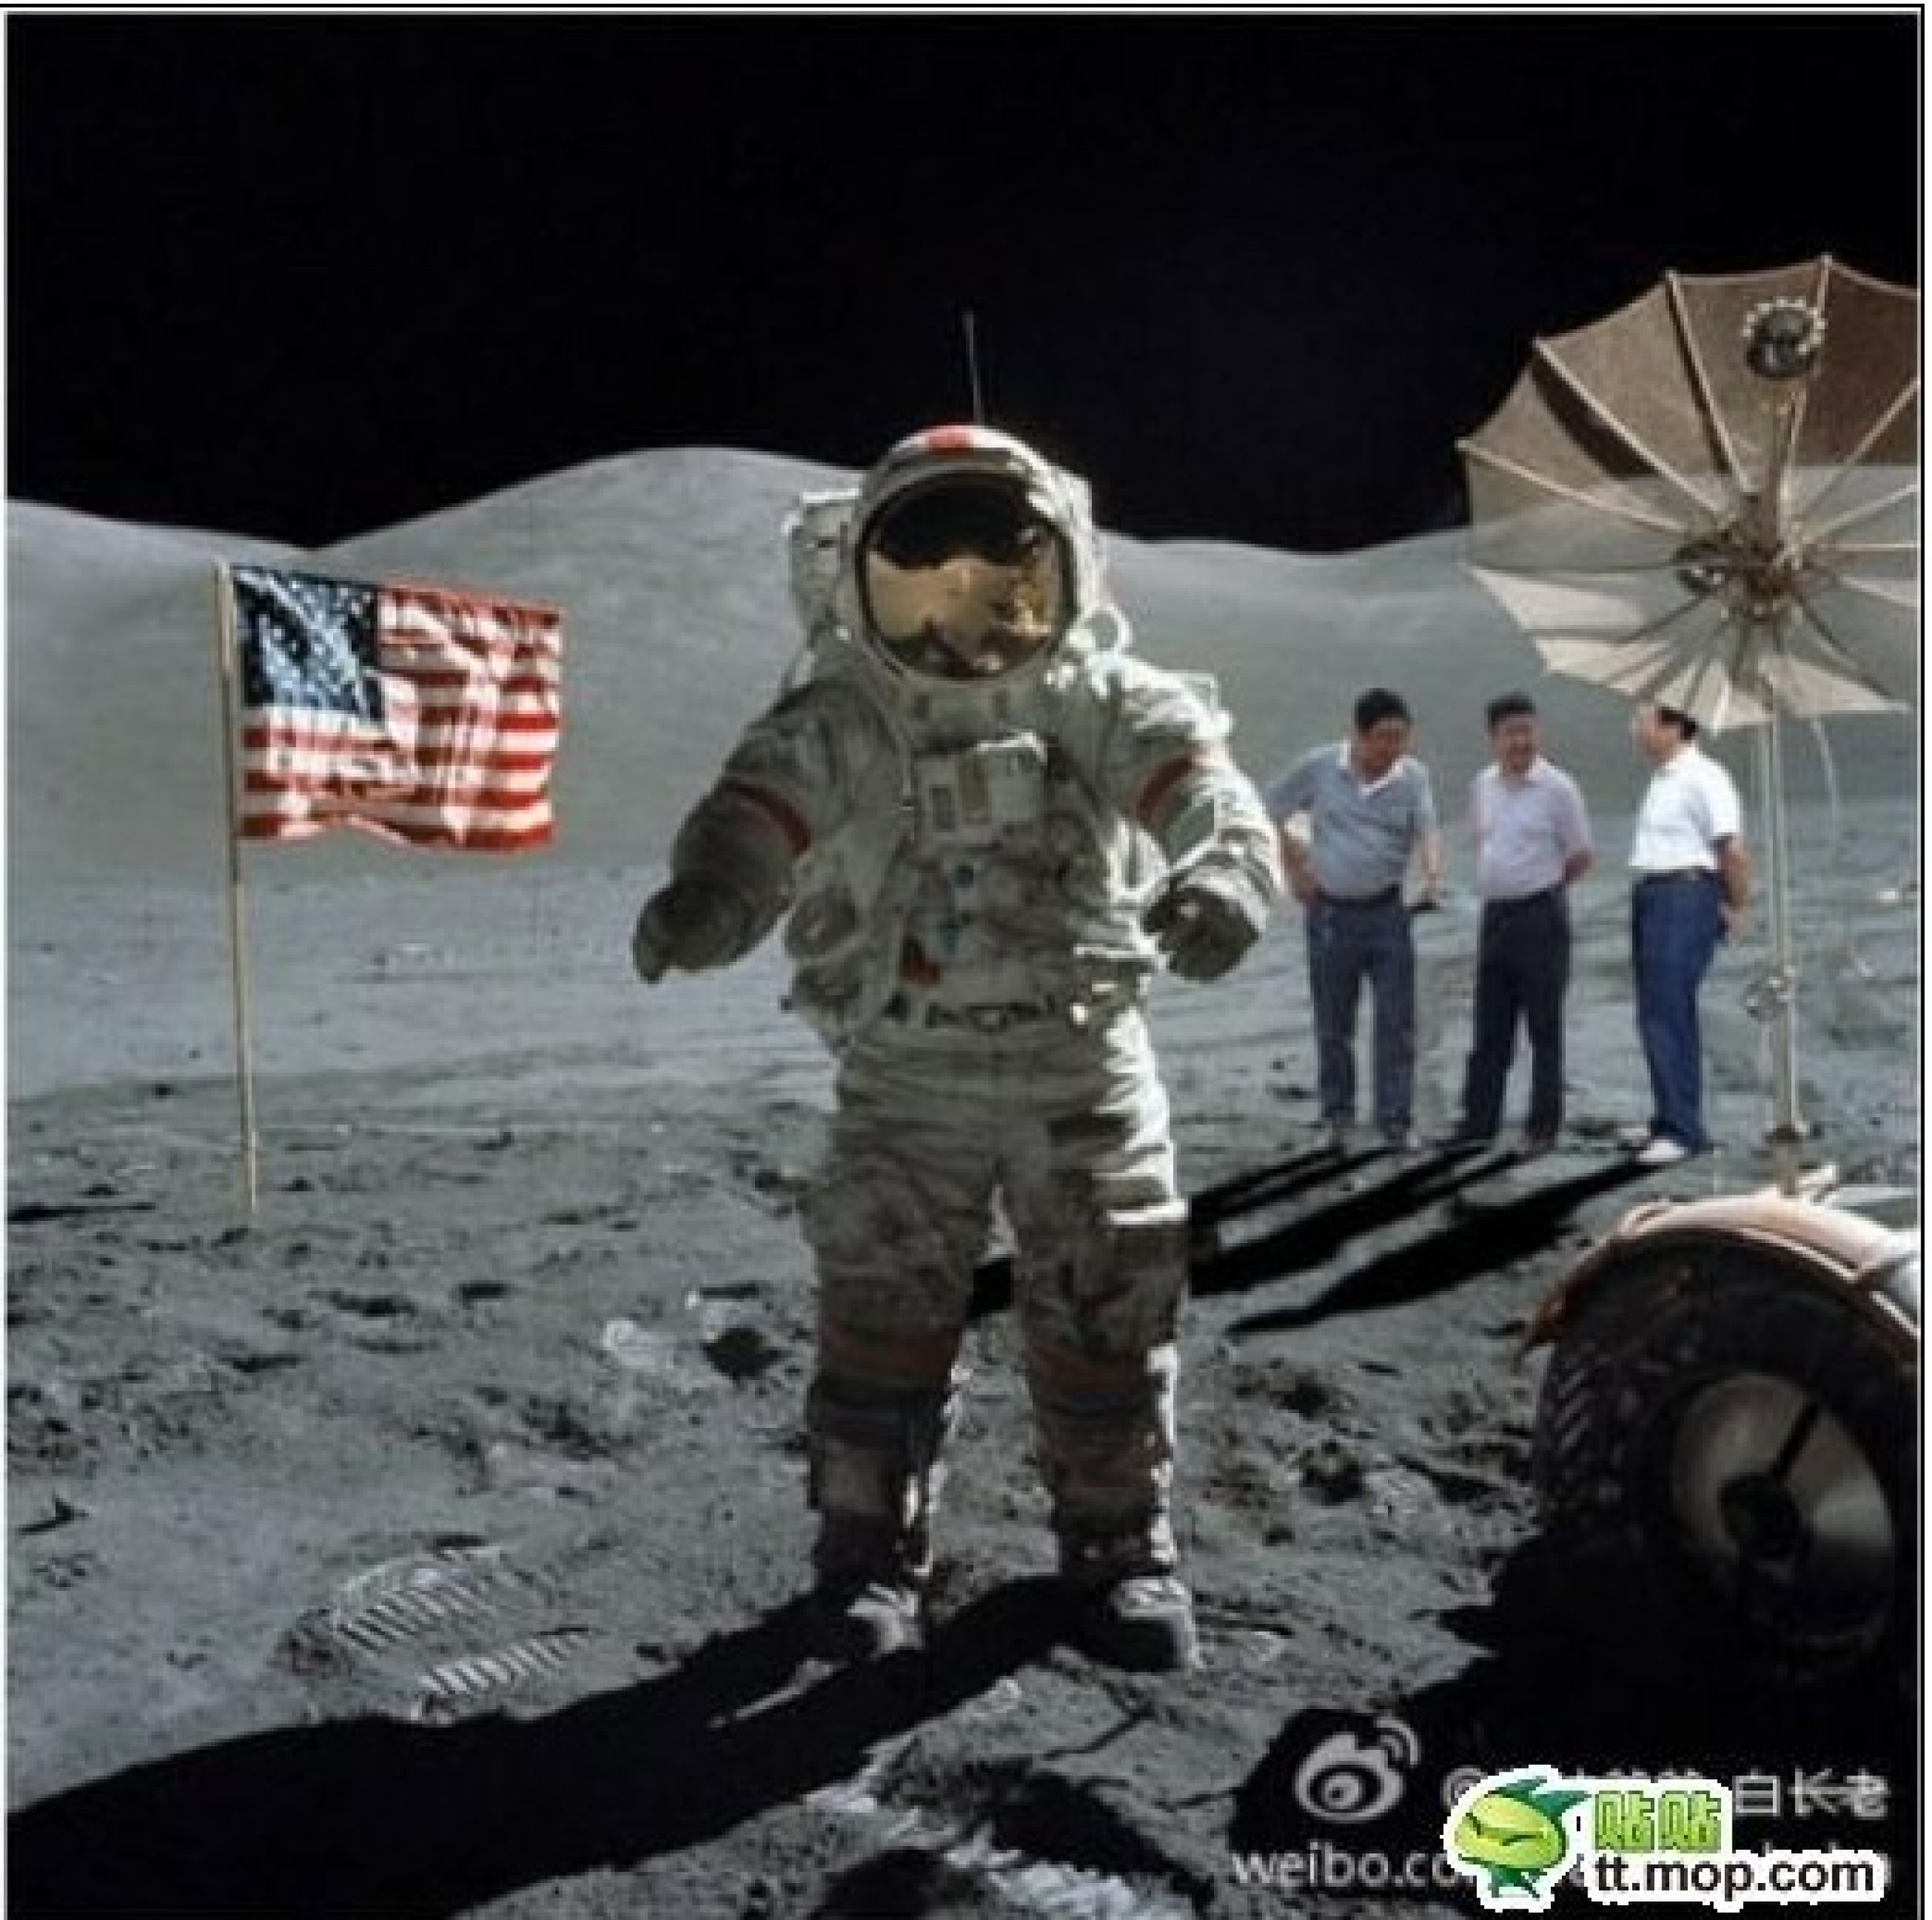 The 3 Chinese government officials travel to Moon.